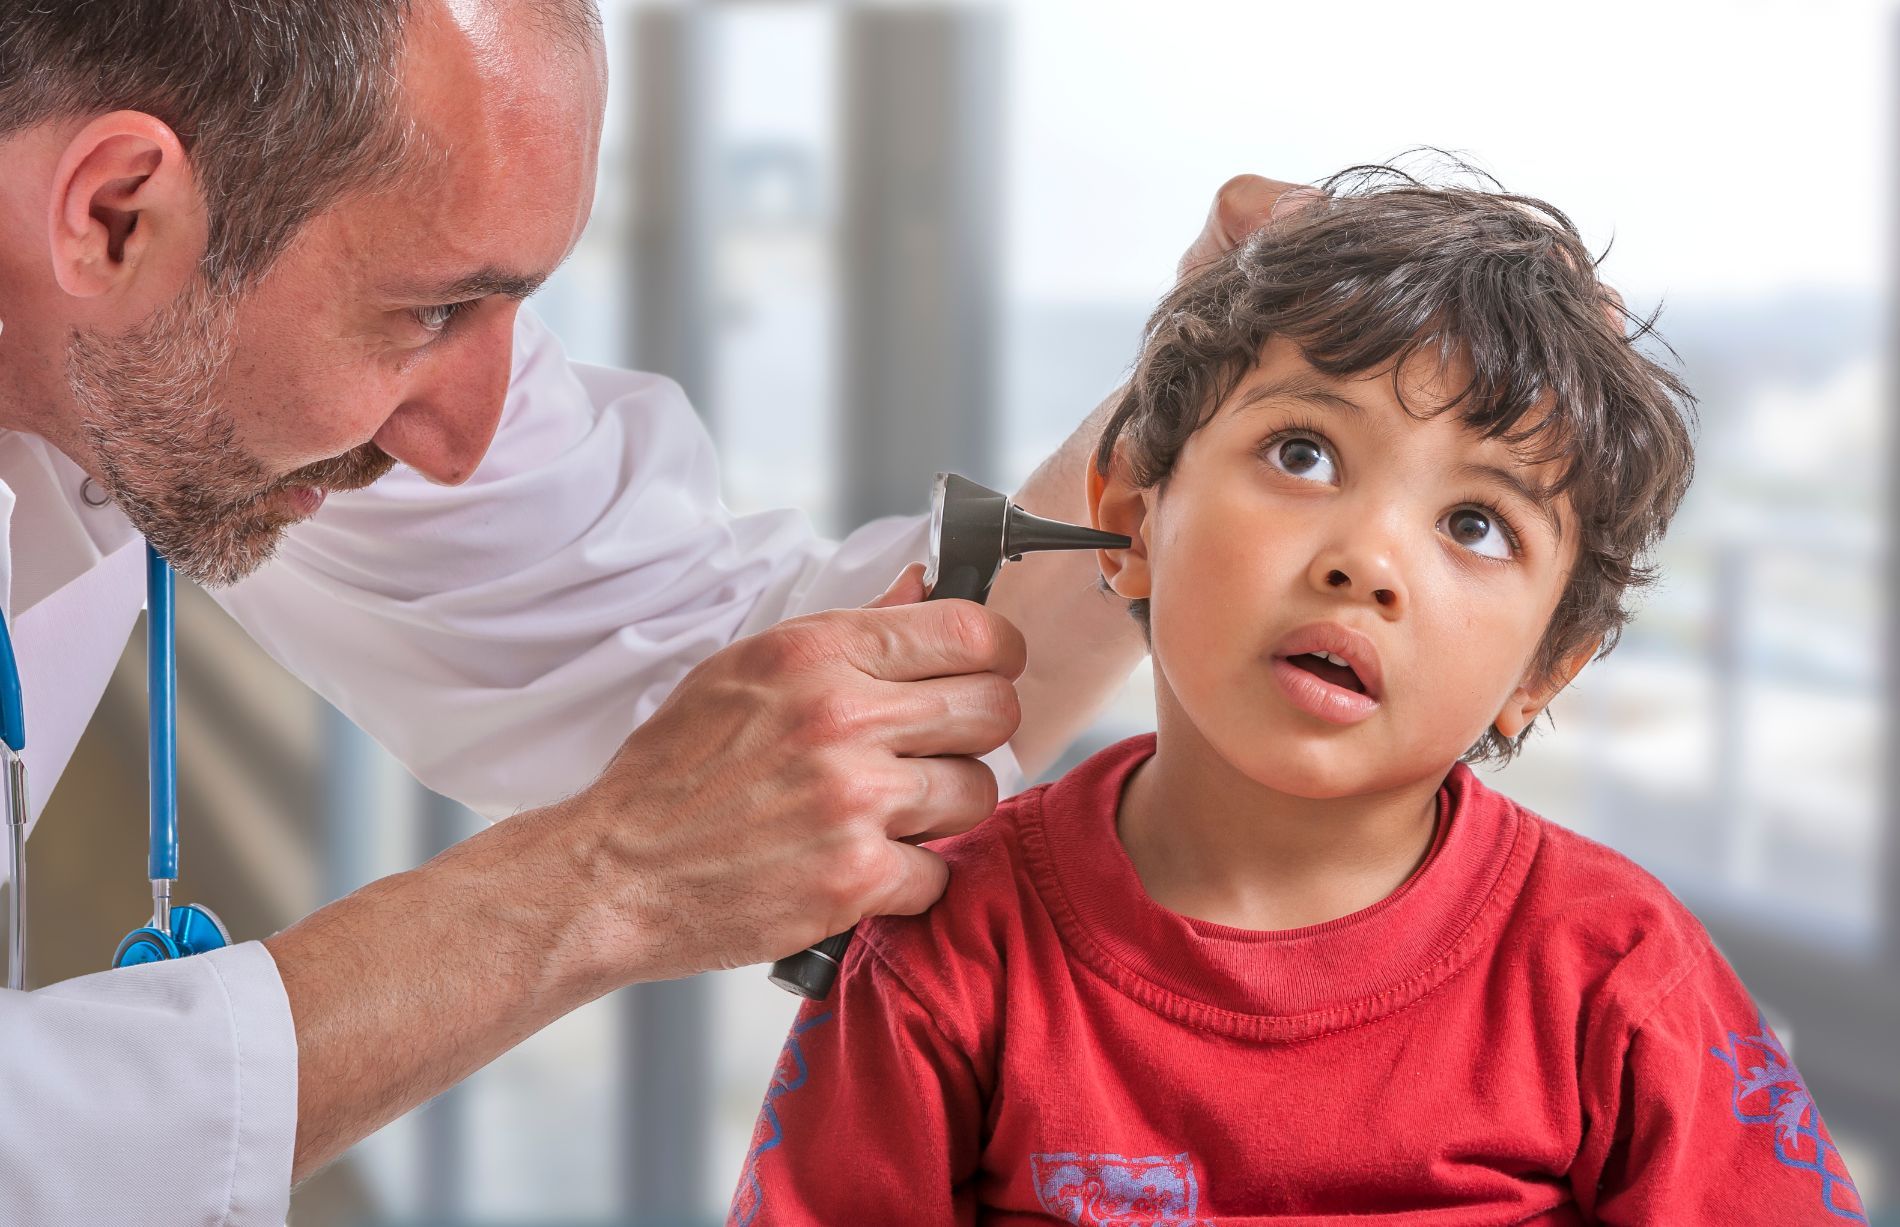 A doctor looking in a child's ear canal